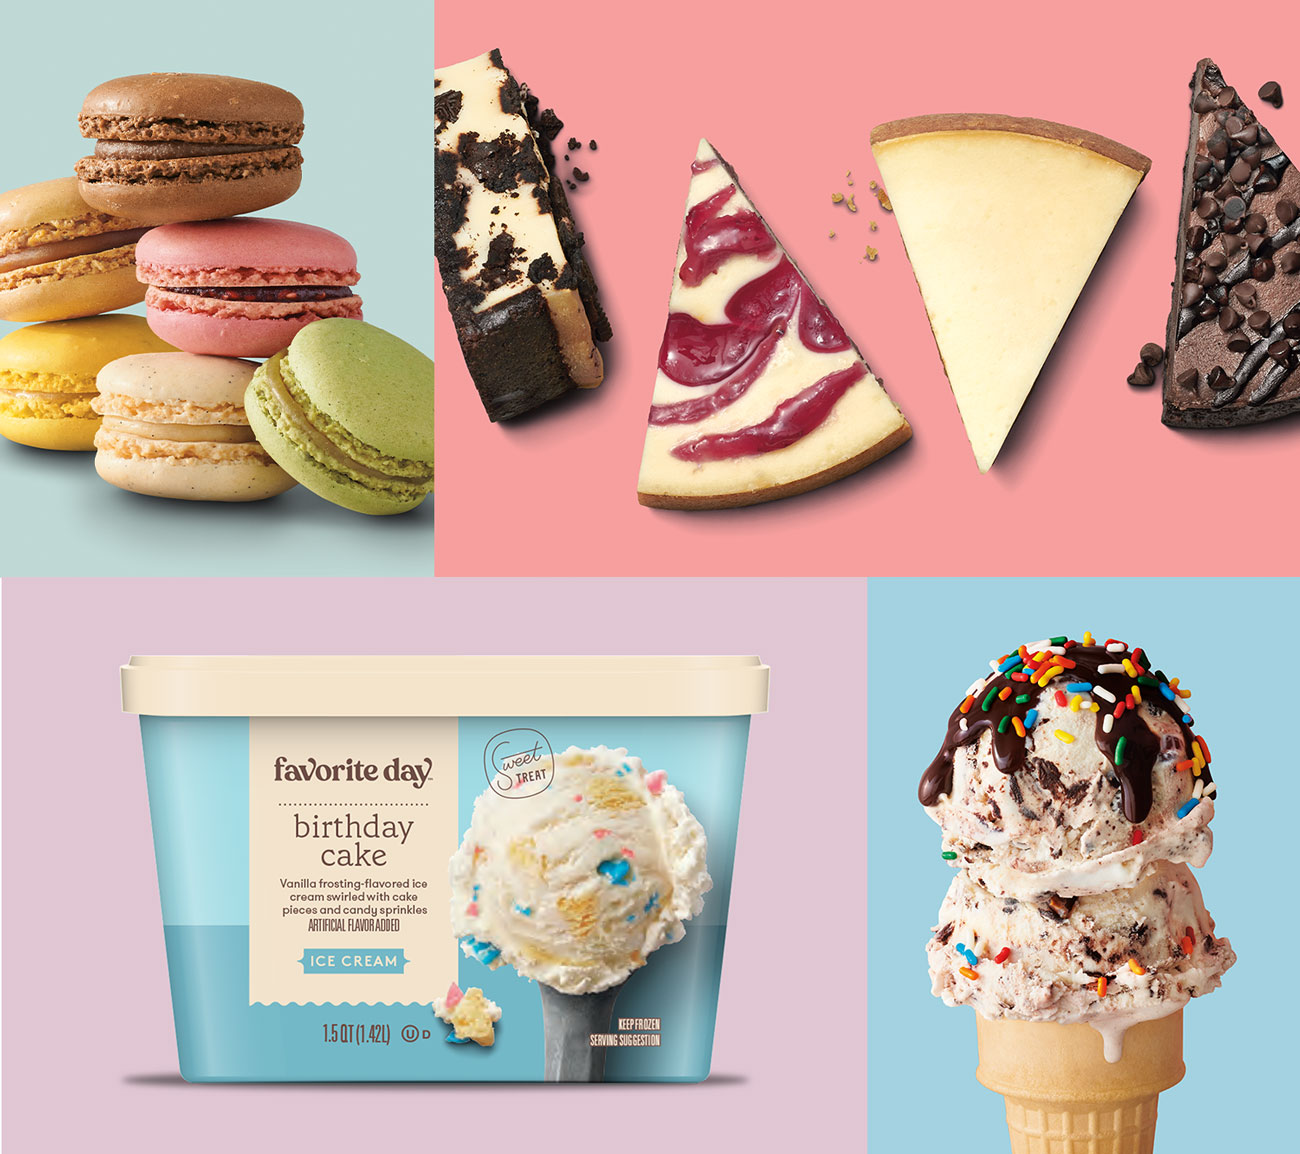 A colorful collage shows a mix of treats like cheesecake and icecream within and out of their packages.